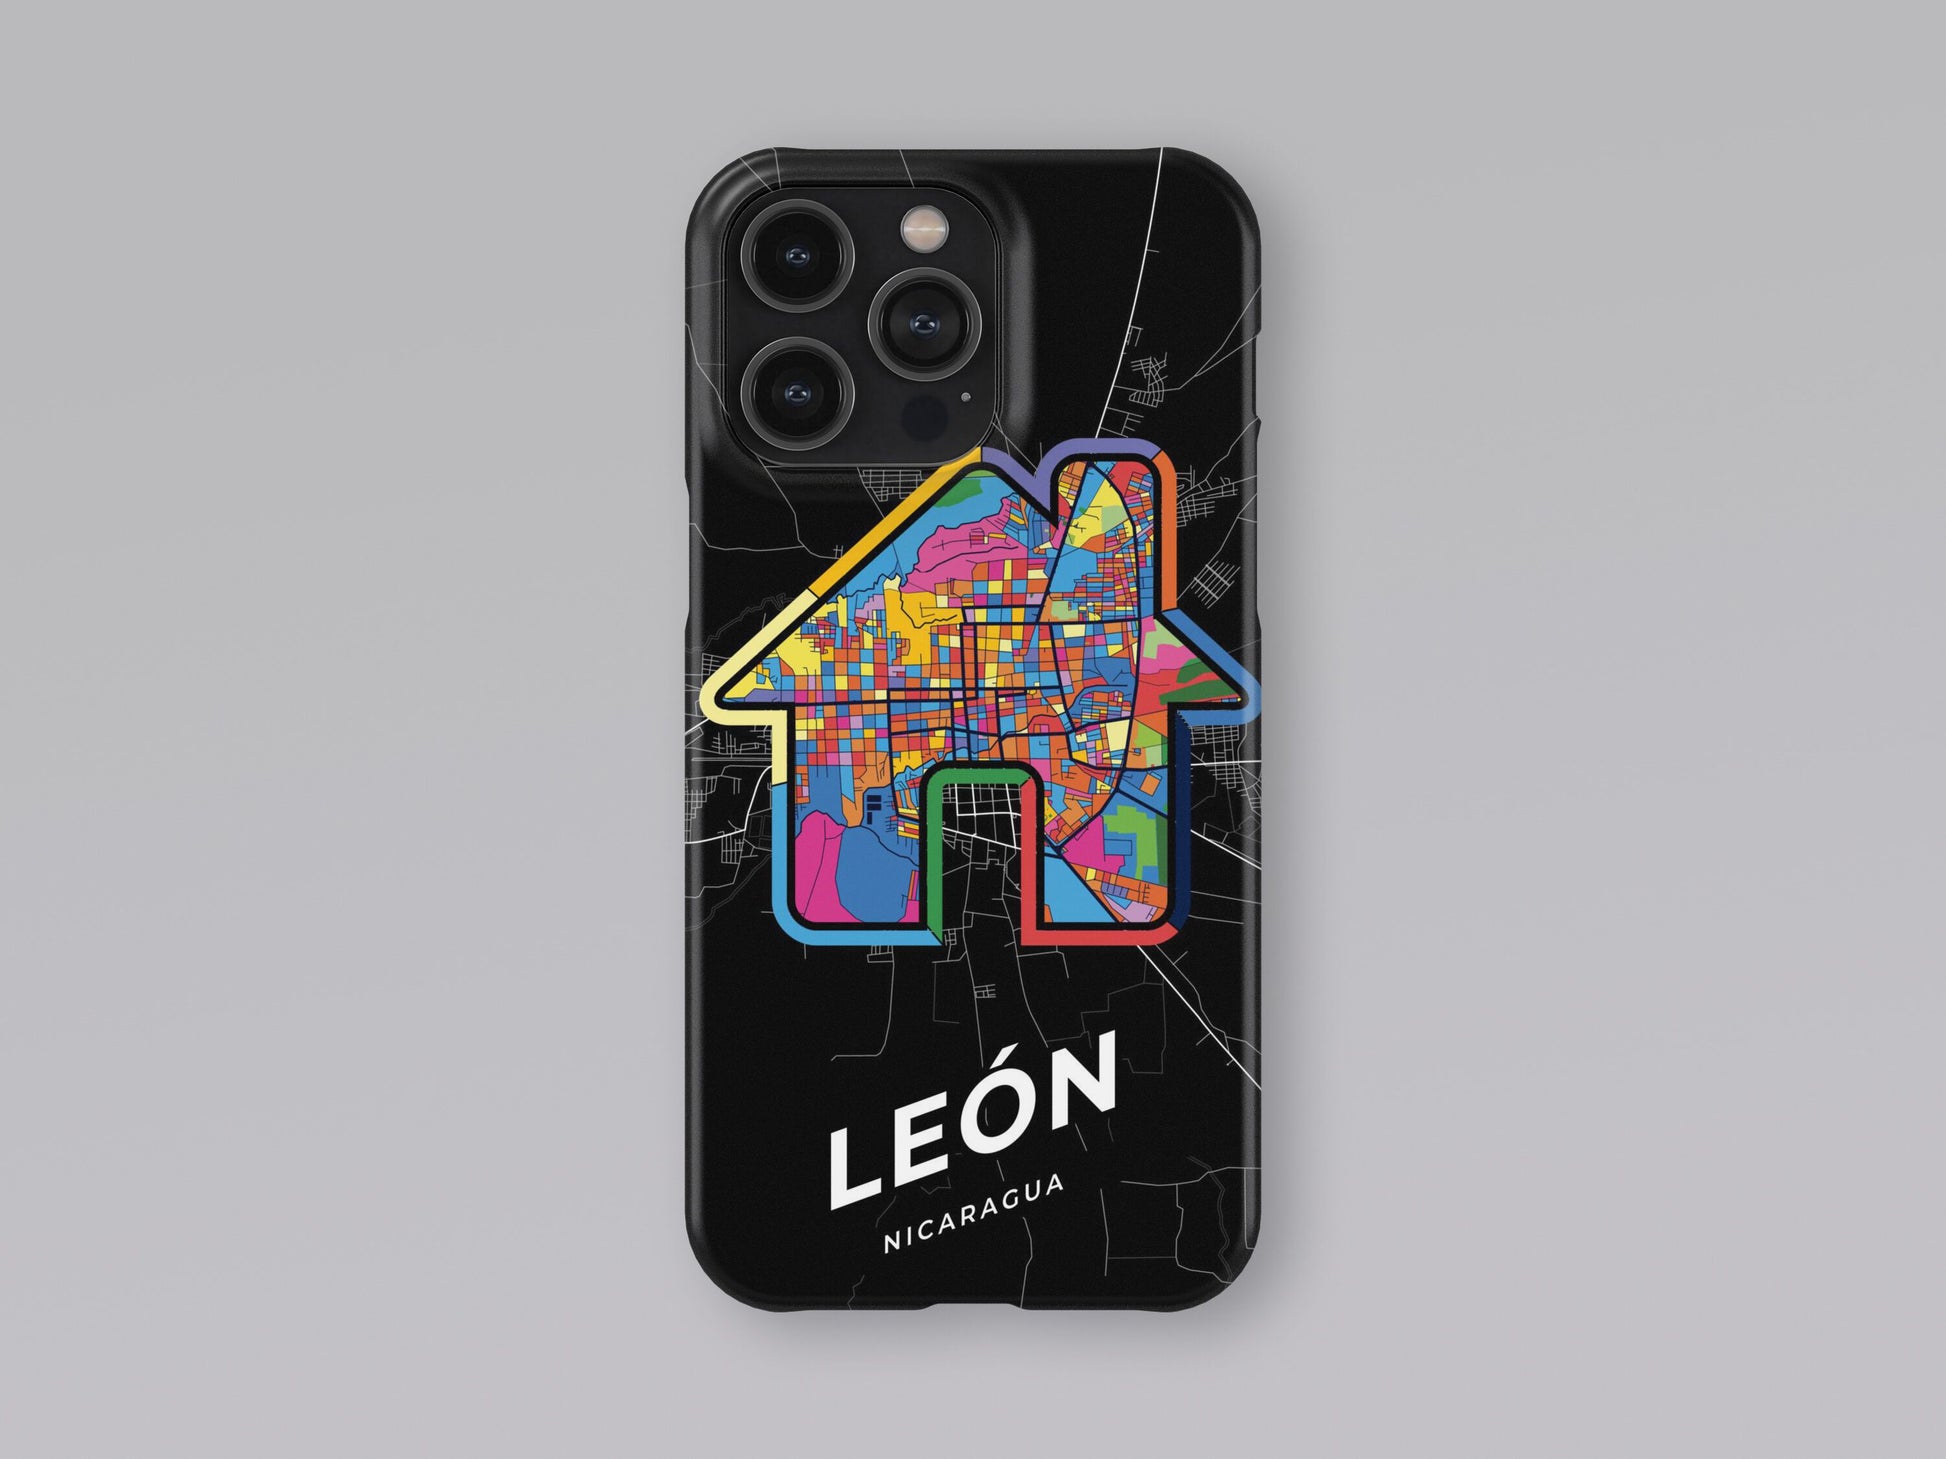 León Nicaragua slim phone case with colorful icon. Birthday, wedding or housewarming gift. Couple match cases. 3